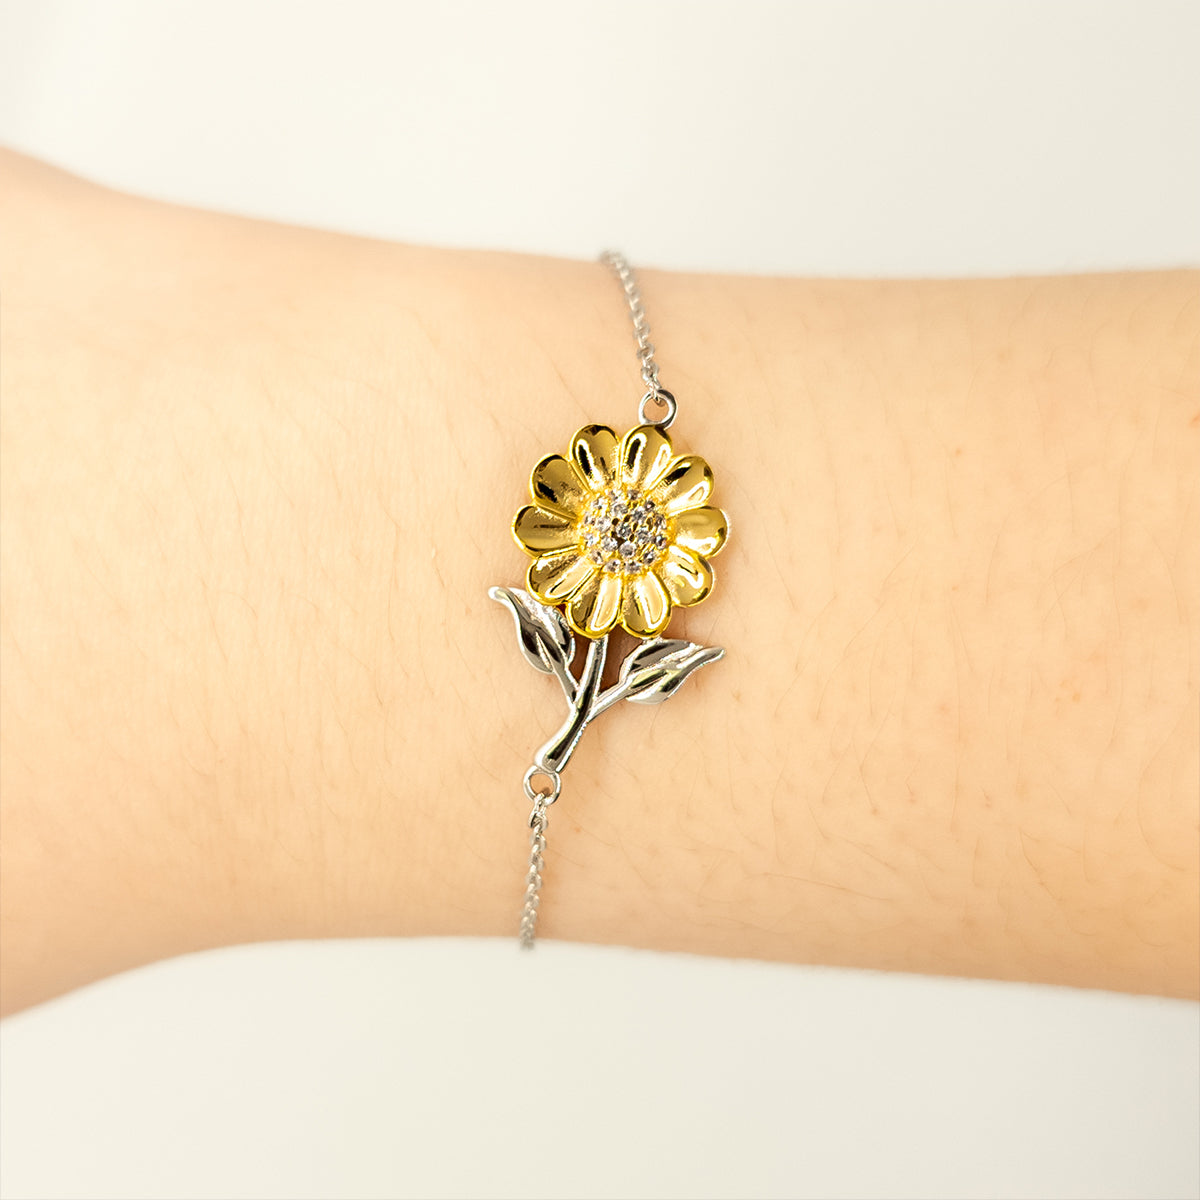 Grandfather Sunflower Bracelet You will always have a special place in my heart. Perfect Gift for Birthday, Christmas, and Holidays.